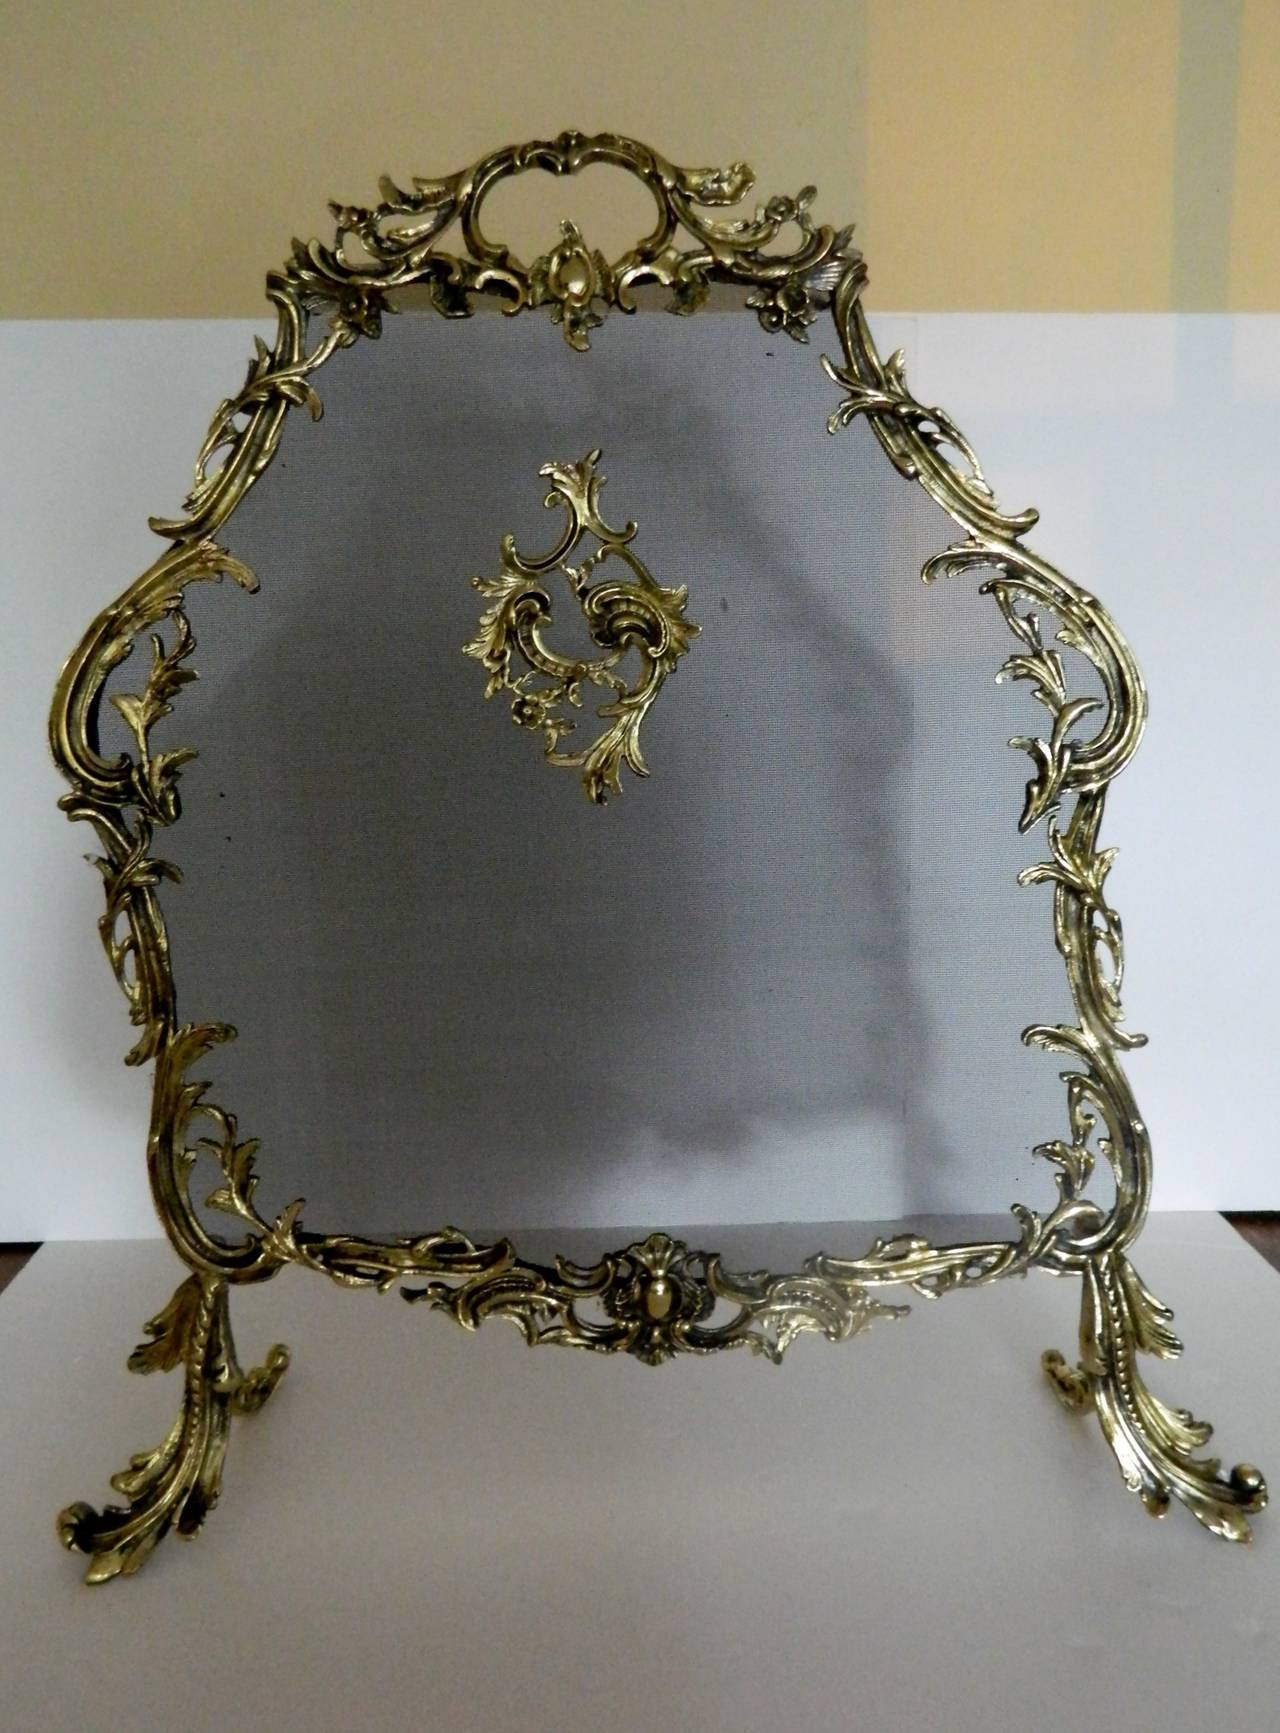 19th Century French Polished Brass Fire Screen Adorned with a Center Flower and Shell